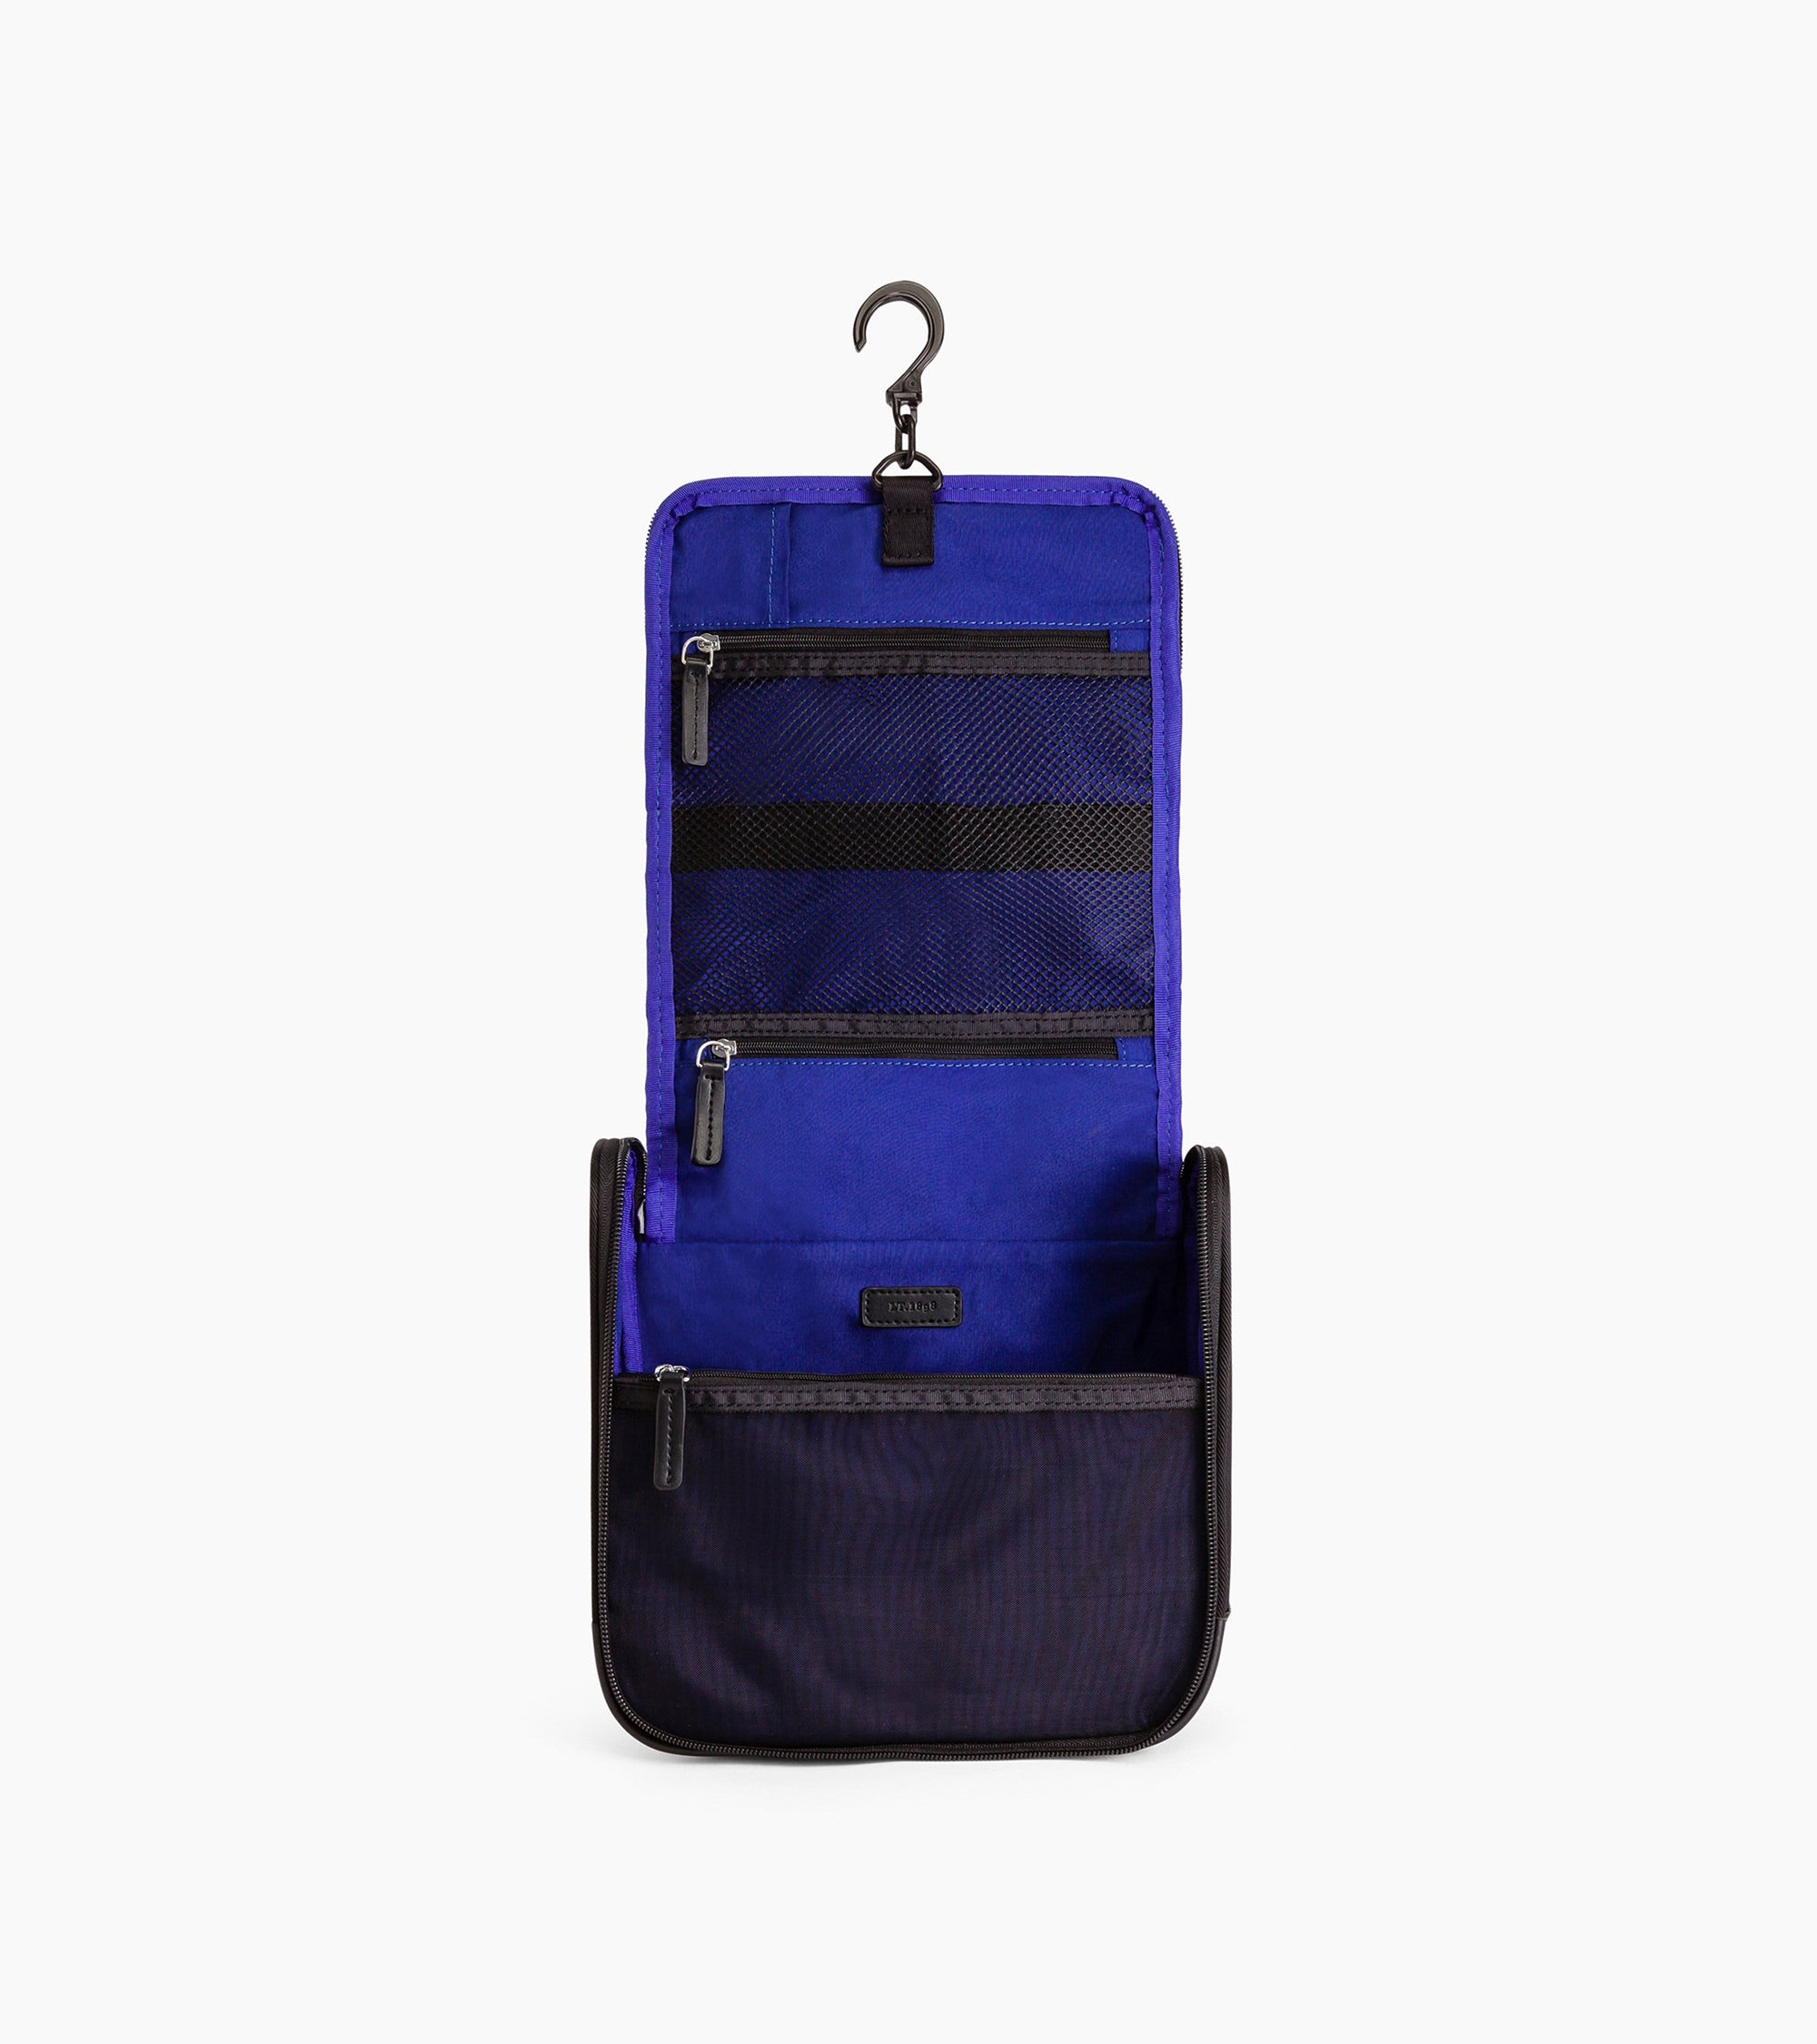 Gaspard fold-out zipped toiletry bag